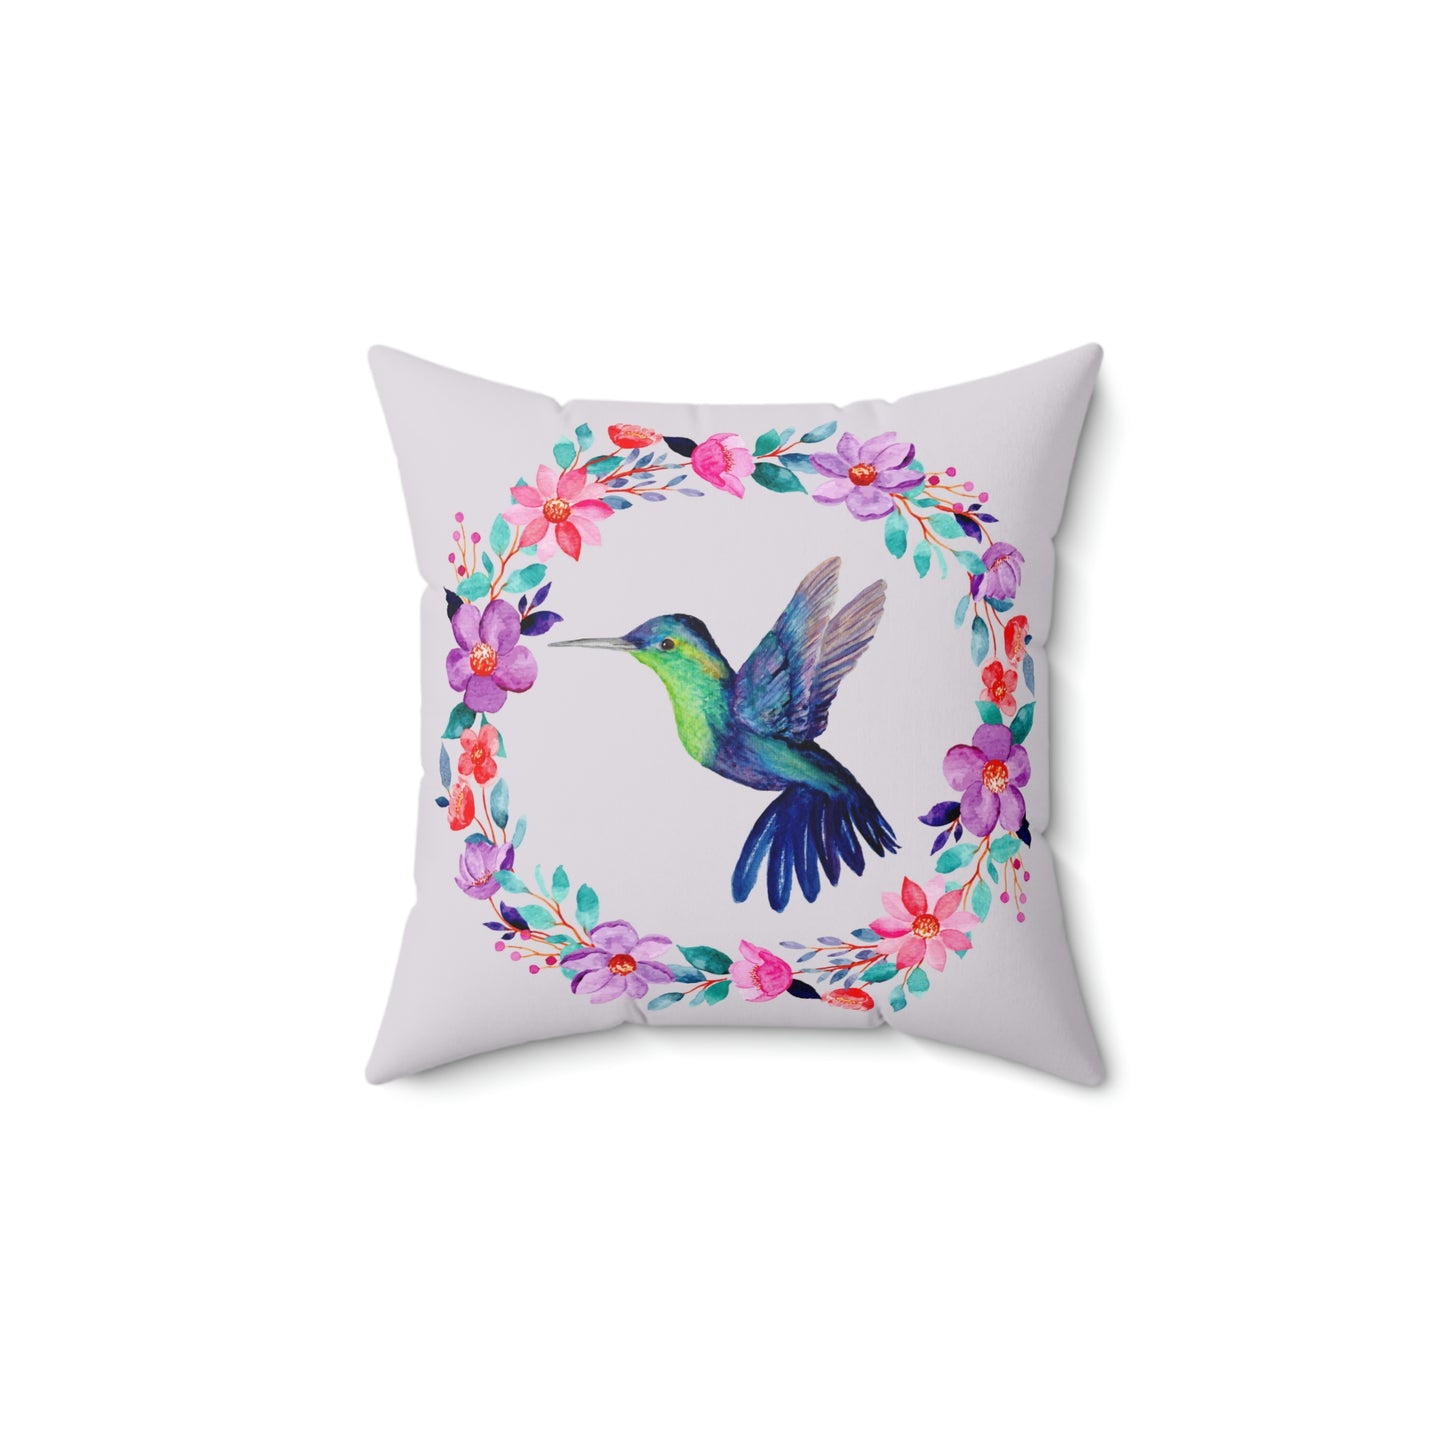 Hammingbird with Floral Wreath design Spun Polyester Square Indoor Pillow